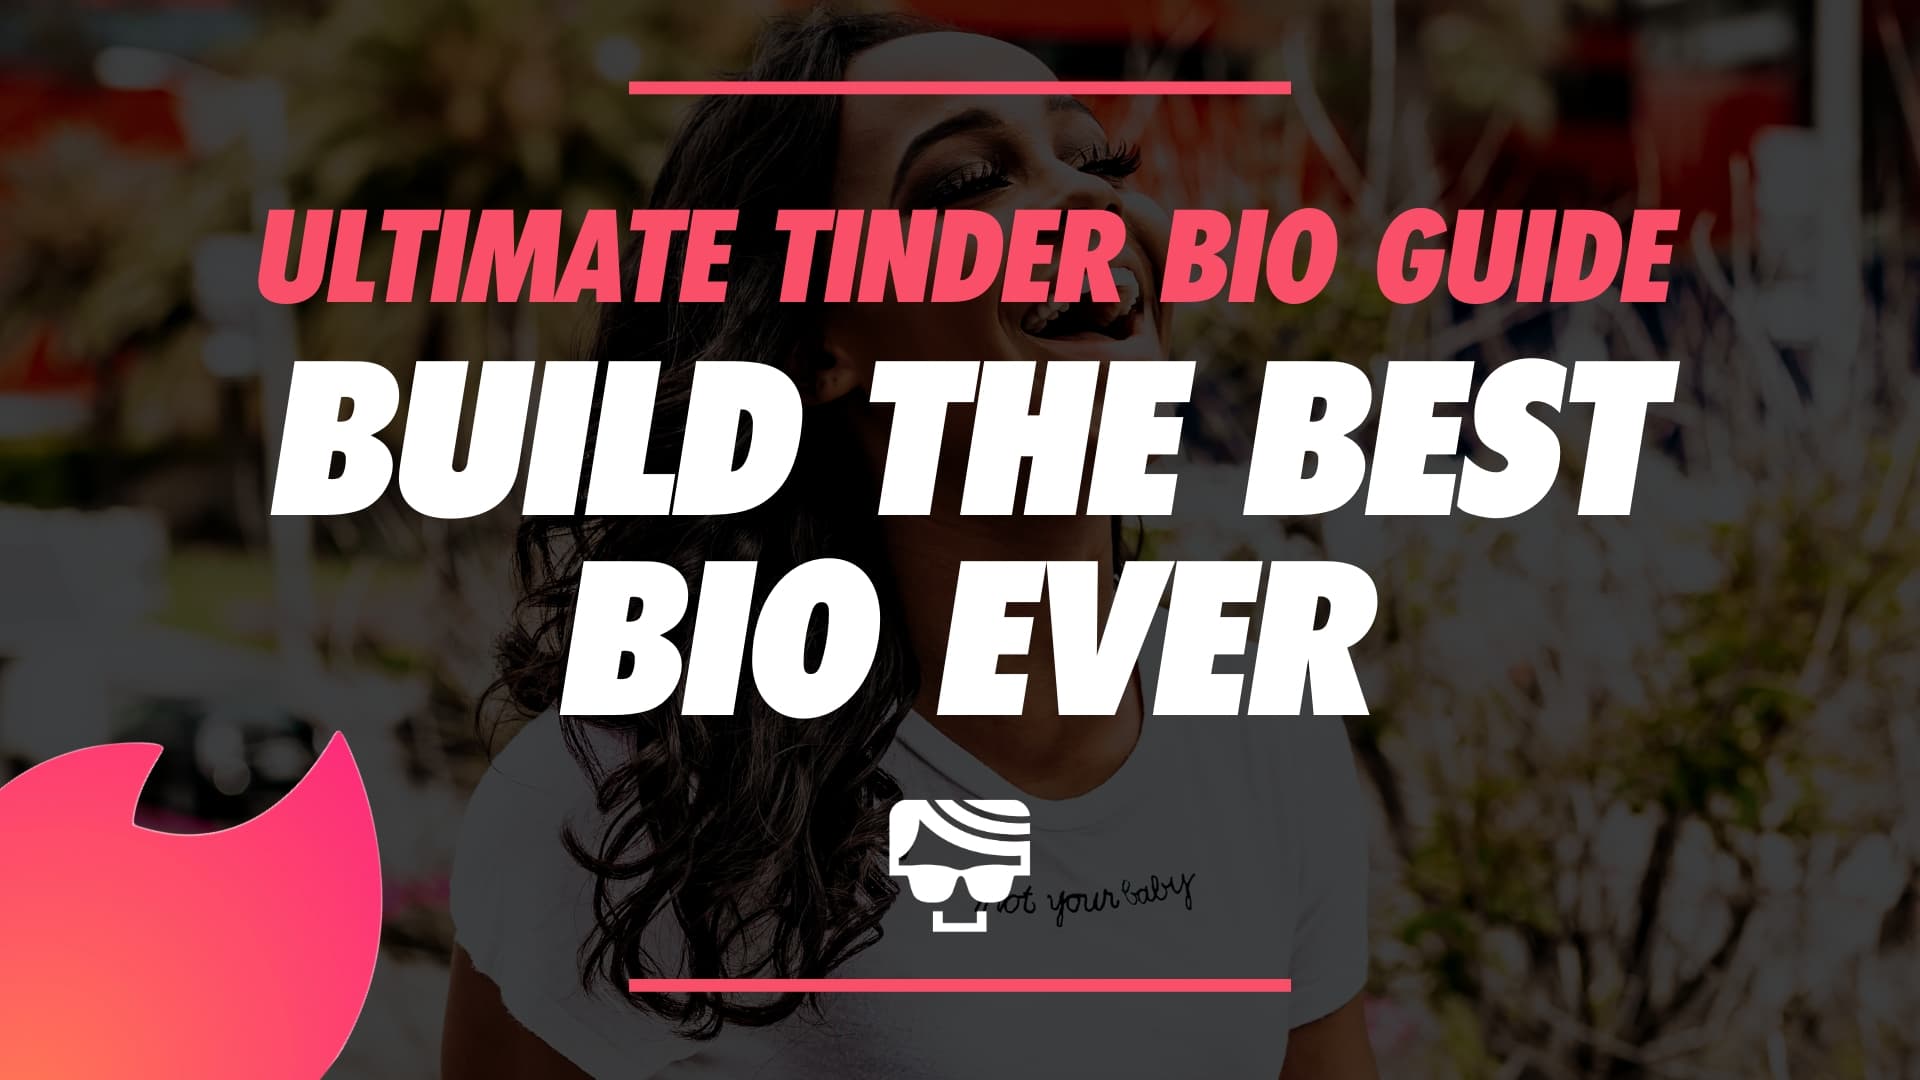 The Tinder Bio Ultimate Guide for 2022 | Tinder Bio Hacks and Tips